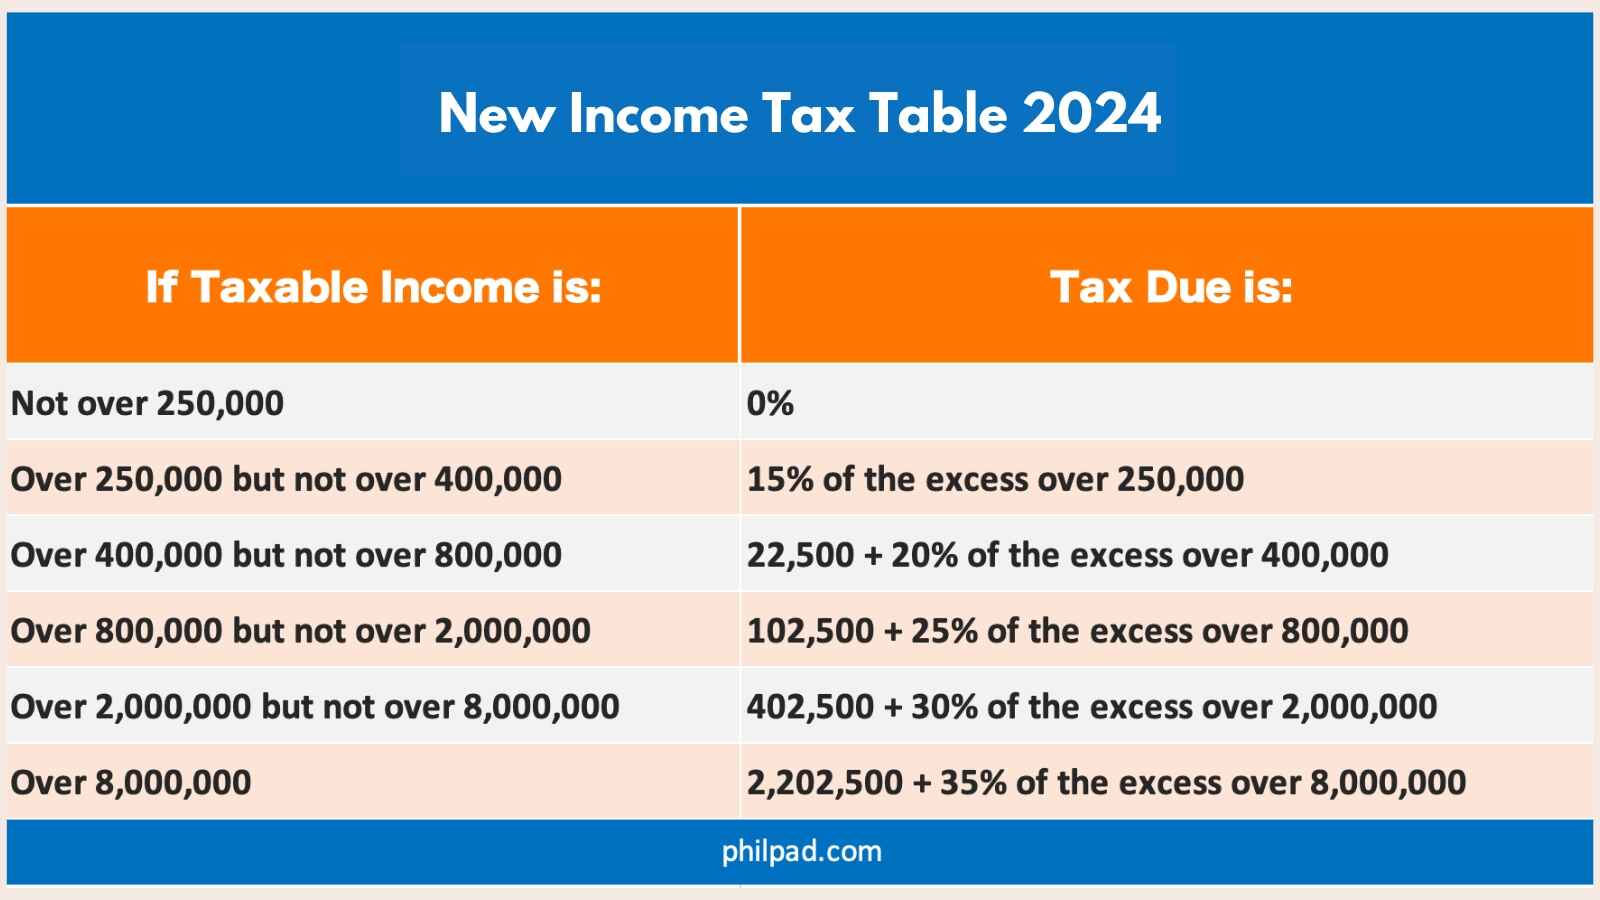 new income tax table 2024 philippines